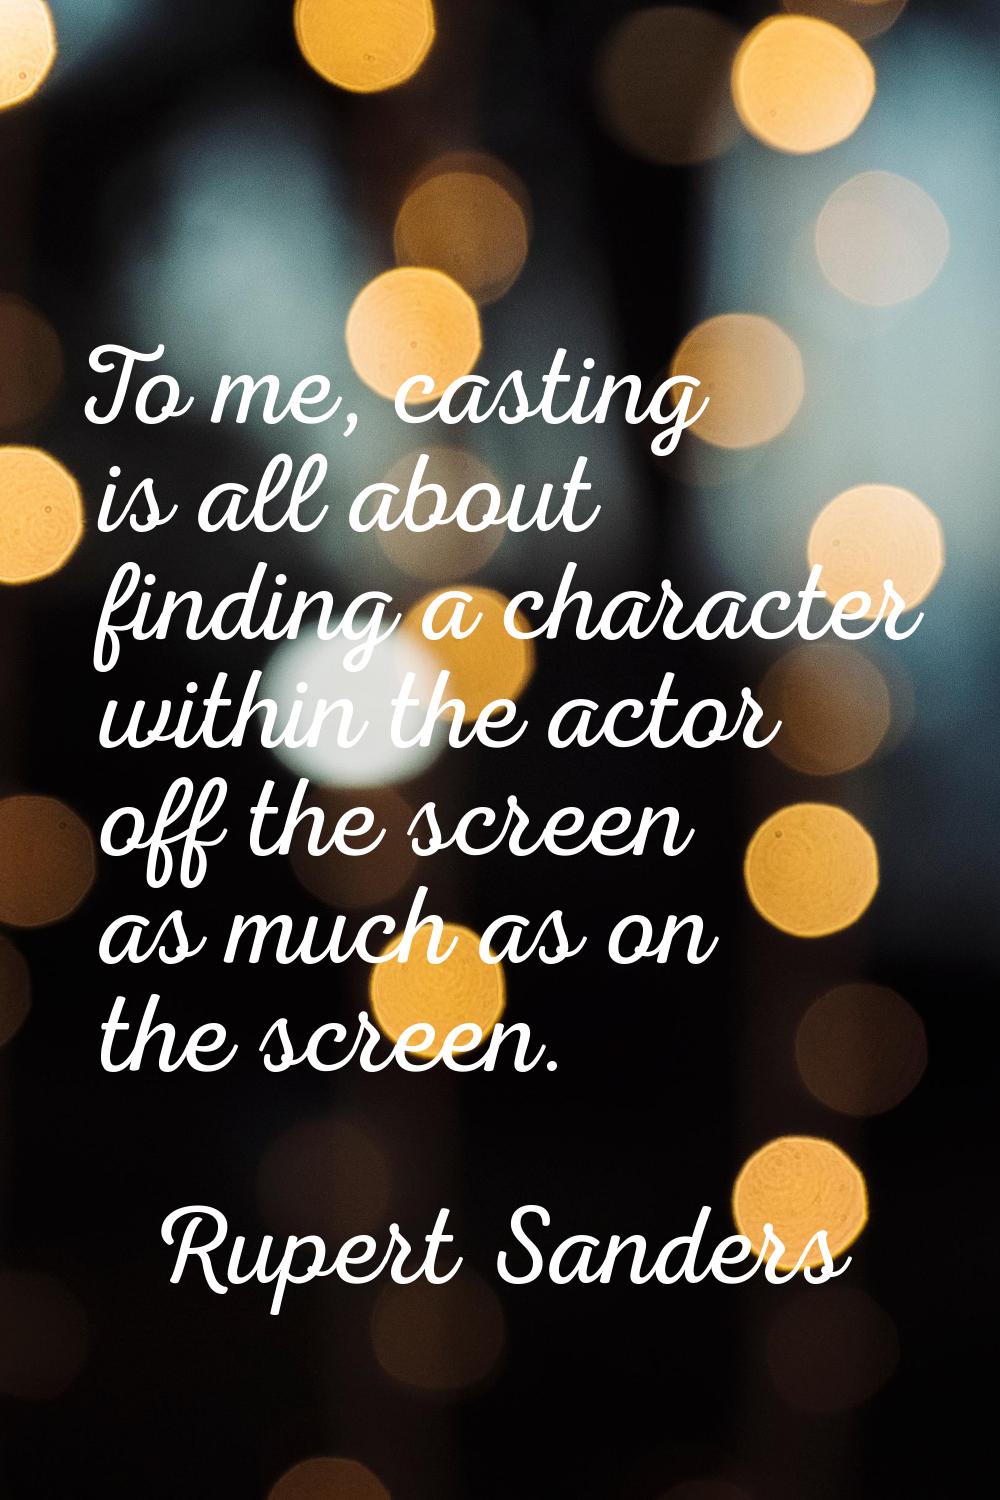 To me, casting is all about finding a character within the actor off the screen as much as on the s